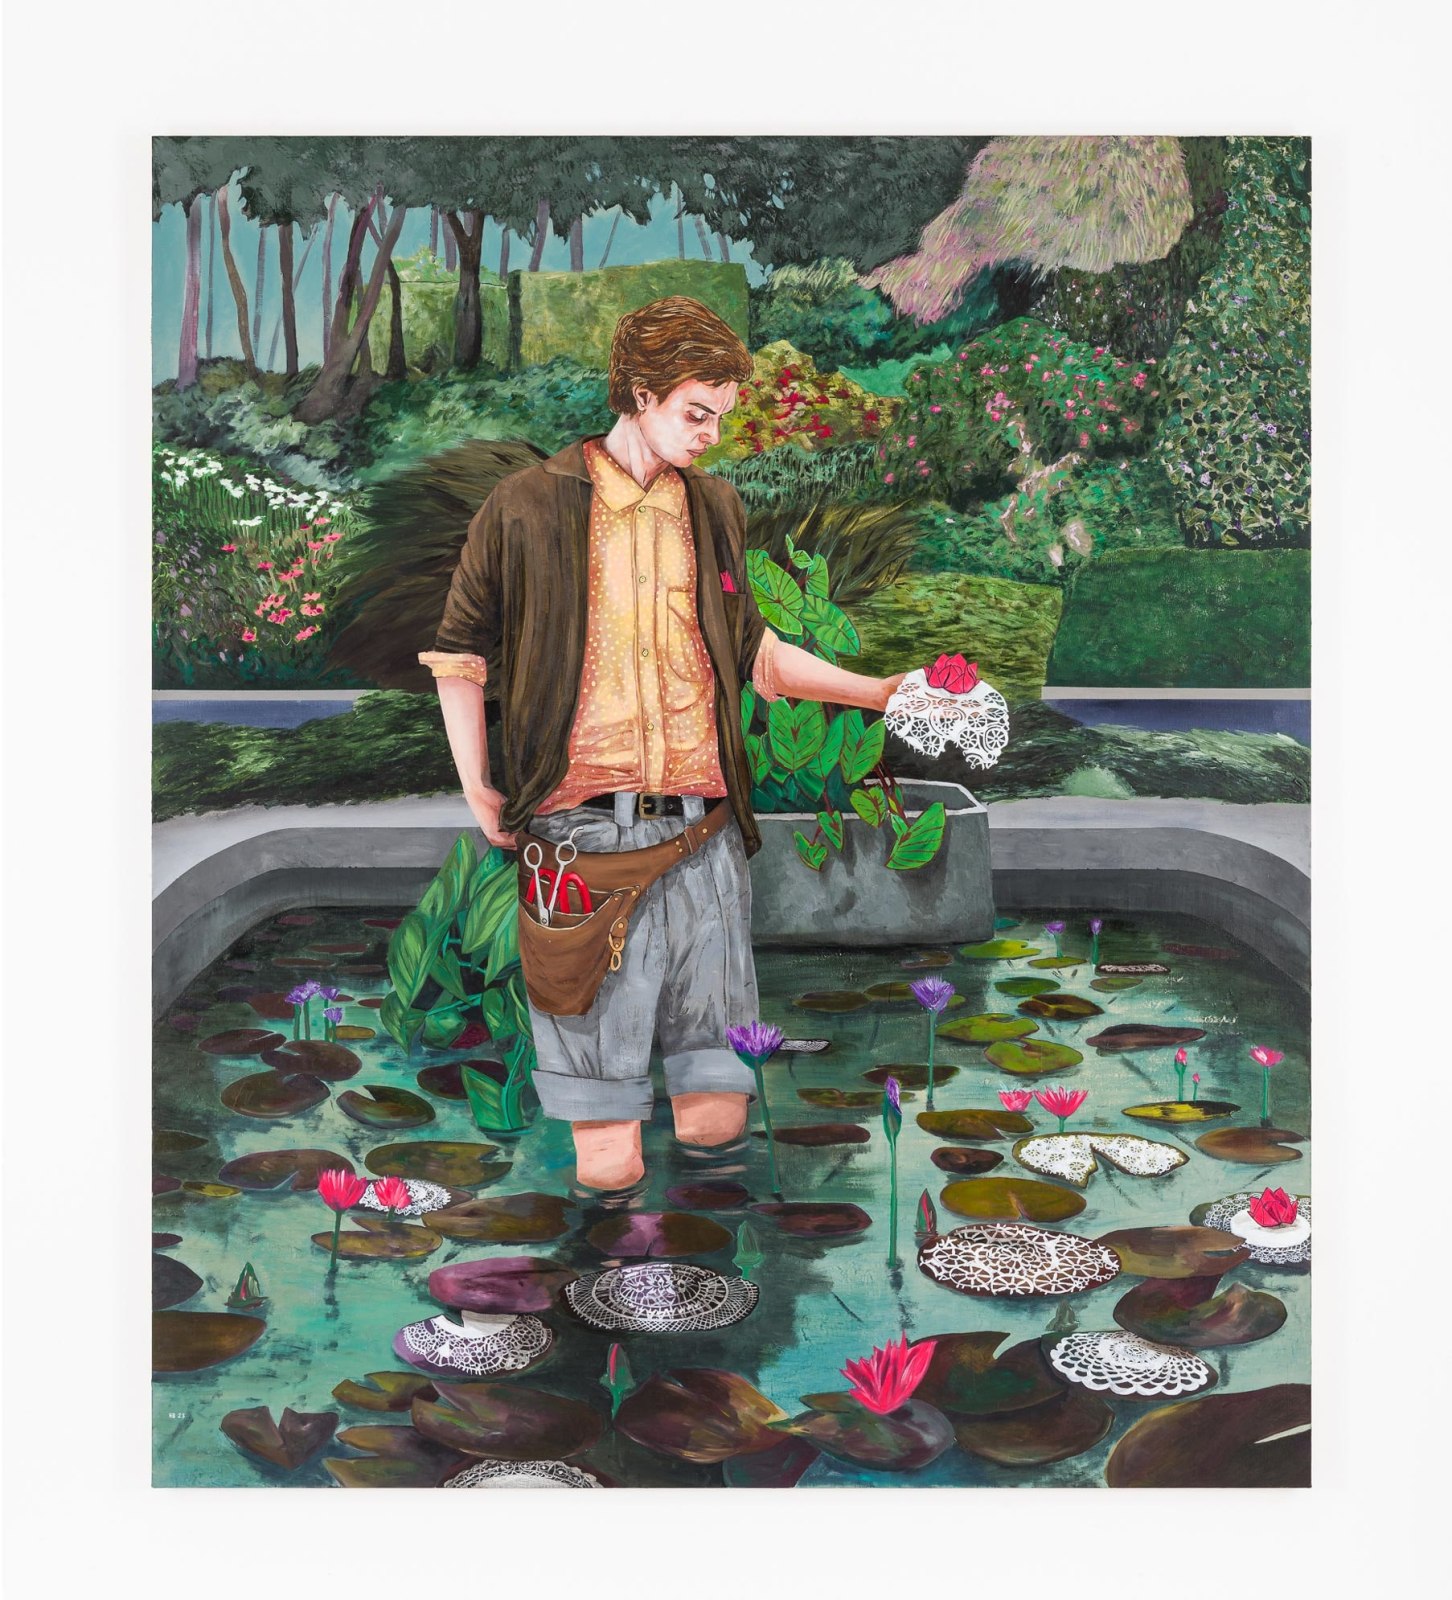 HERNAN BAS, Conceptual artist #17 (With the aid of scissors, paper doilies and origami he elevates lily ponds to attract potential princes), 2023